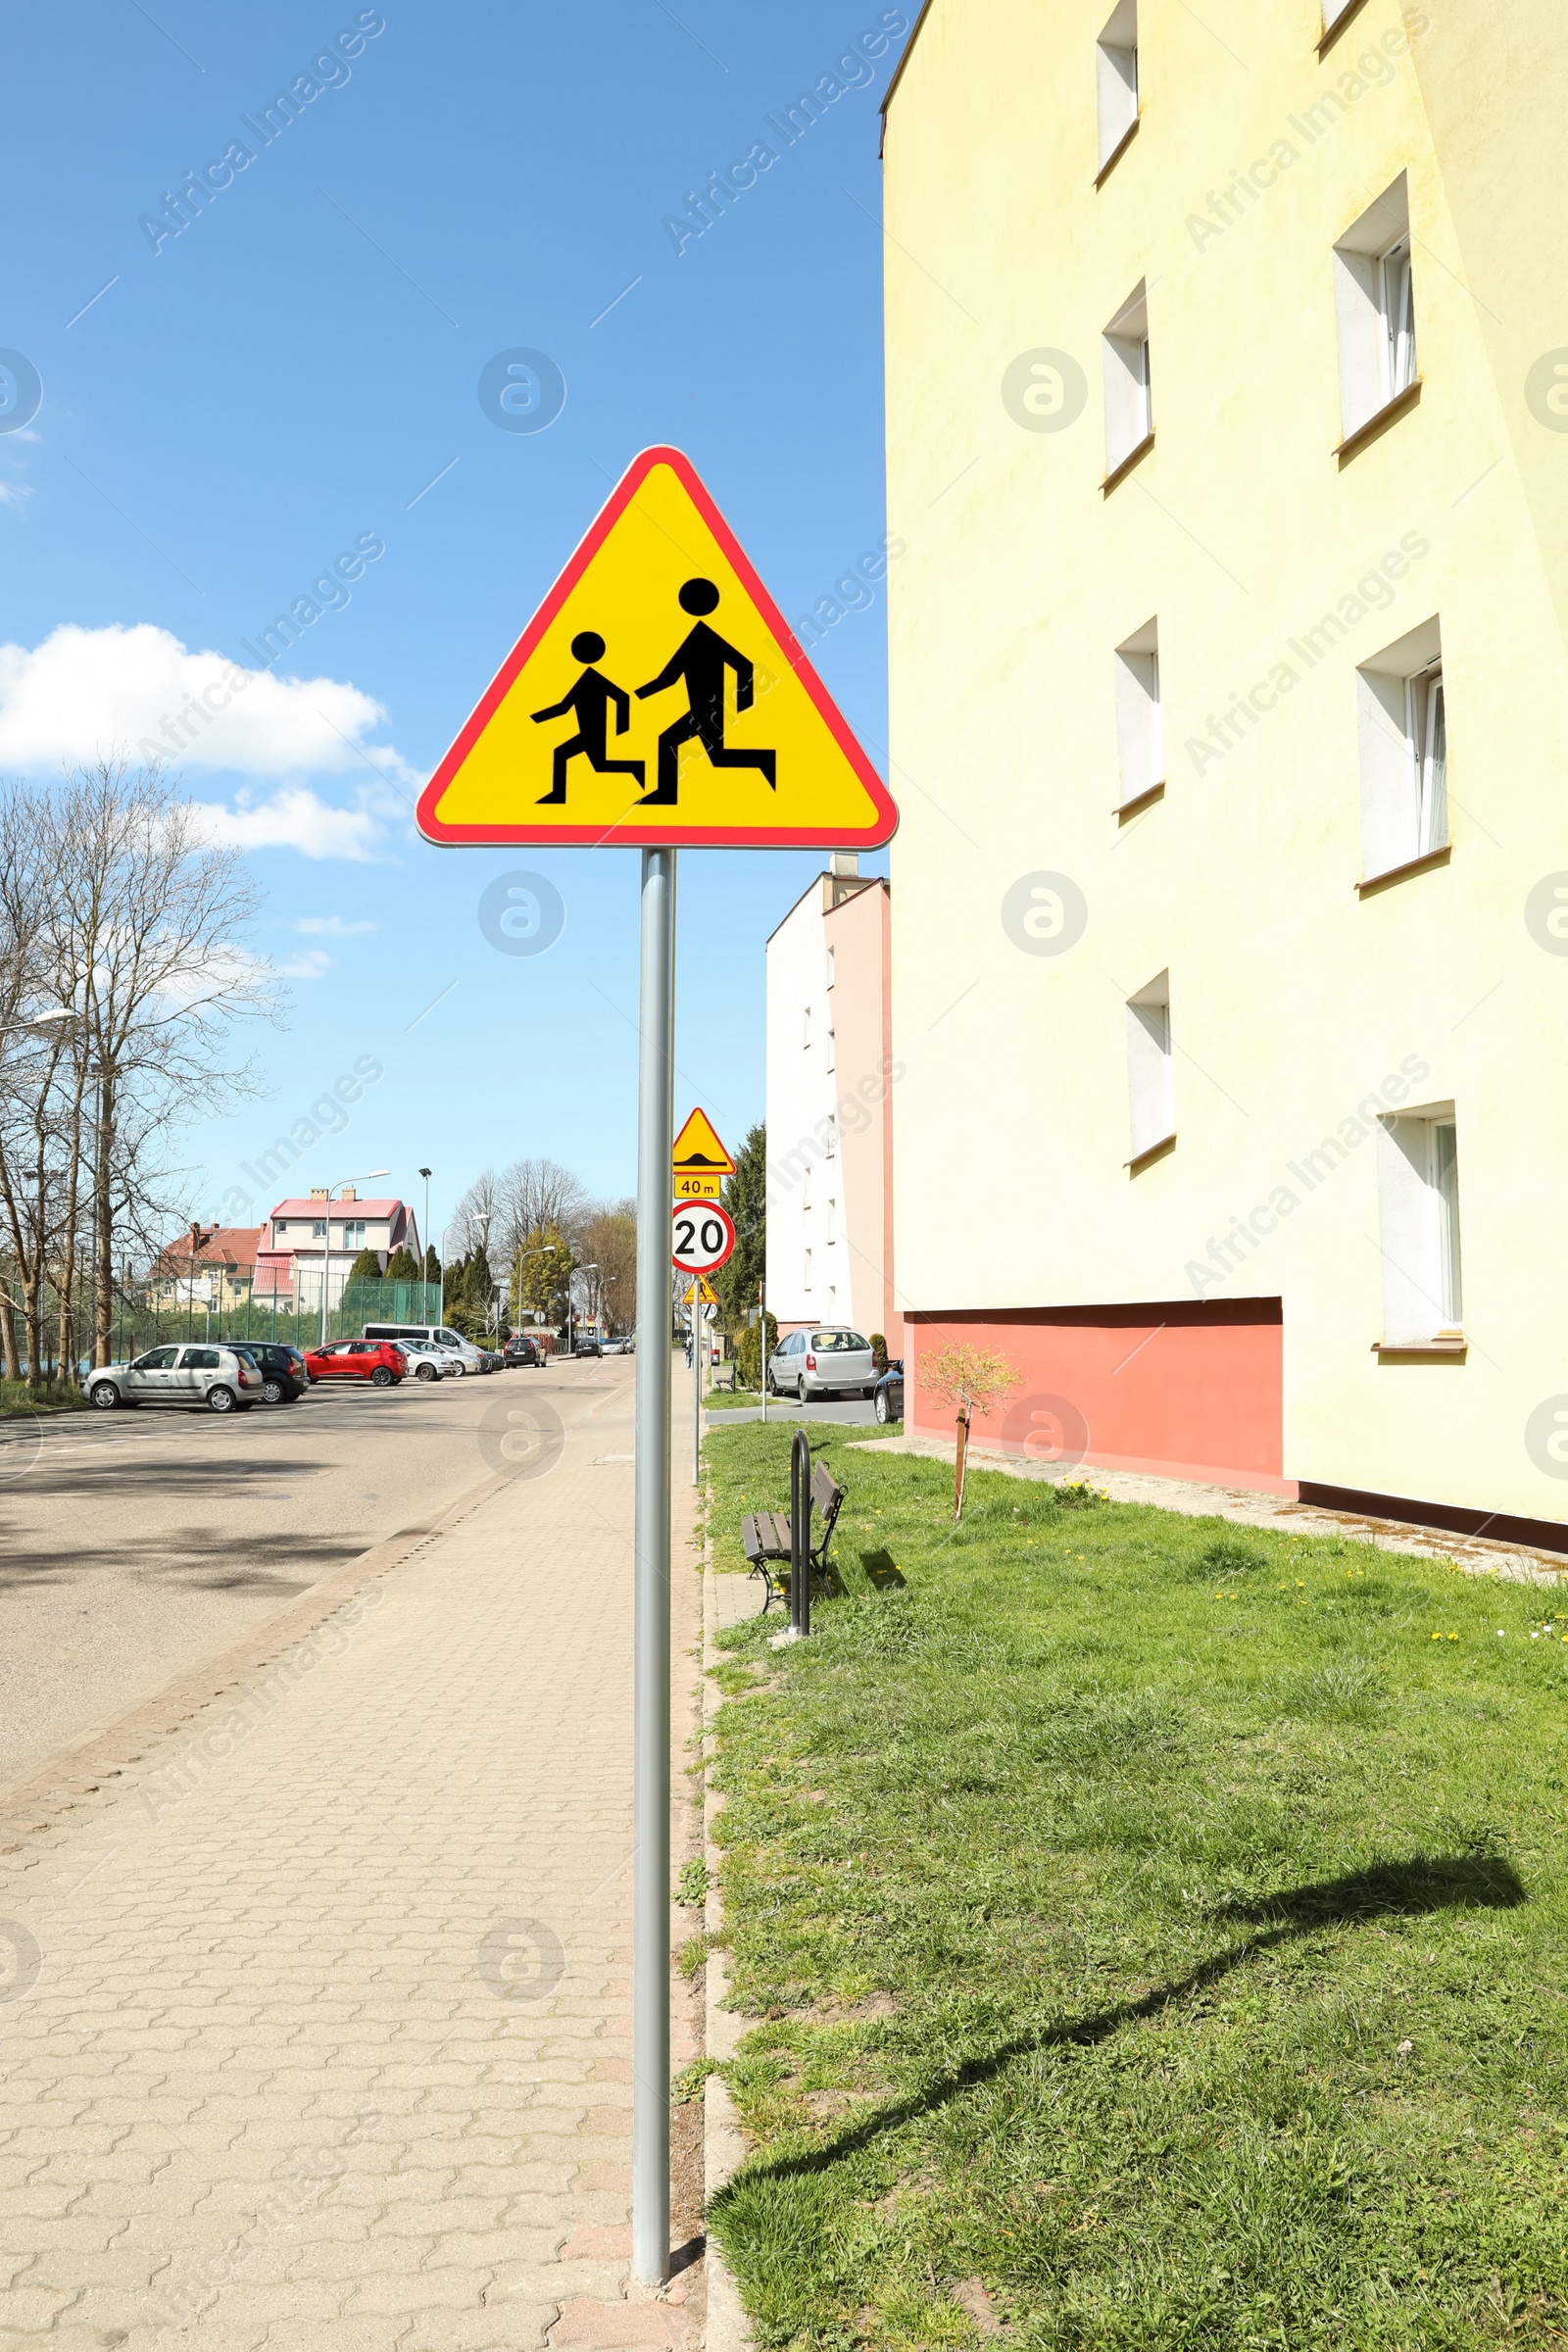 Photo of Traffic sign Children outdoors on sunny day